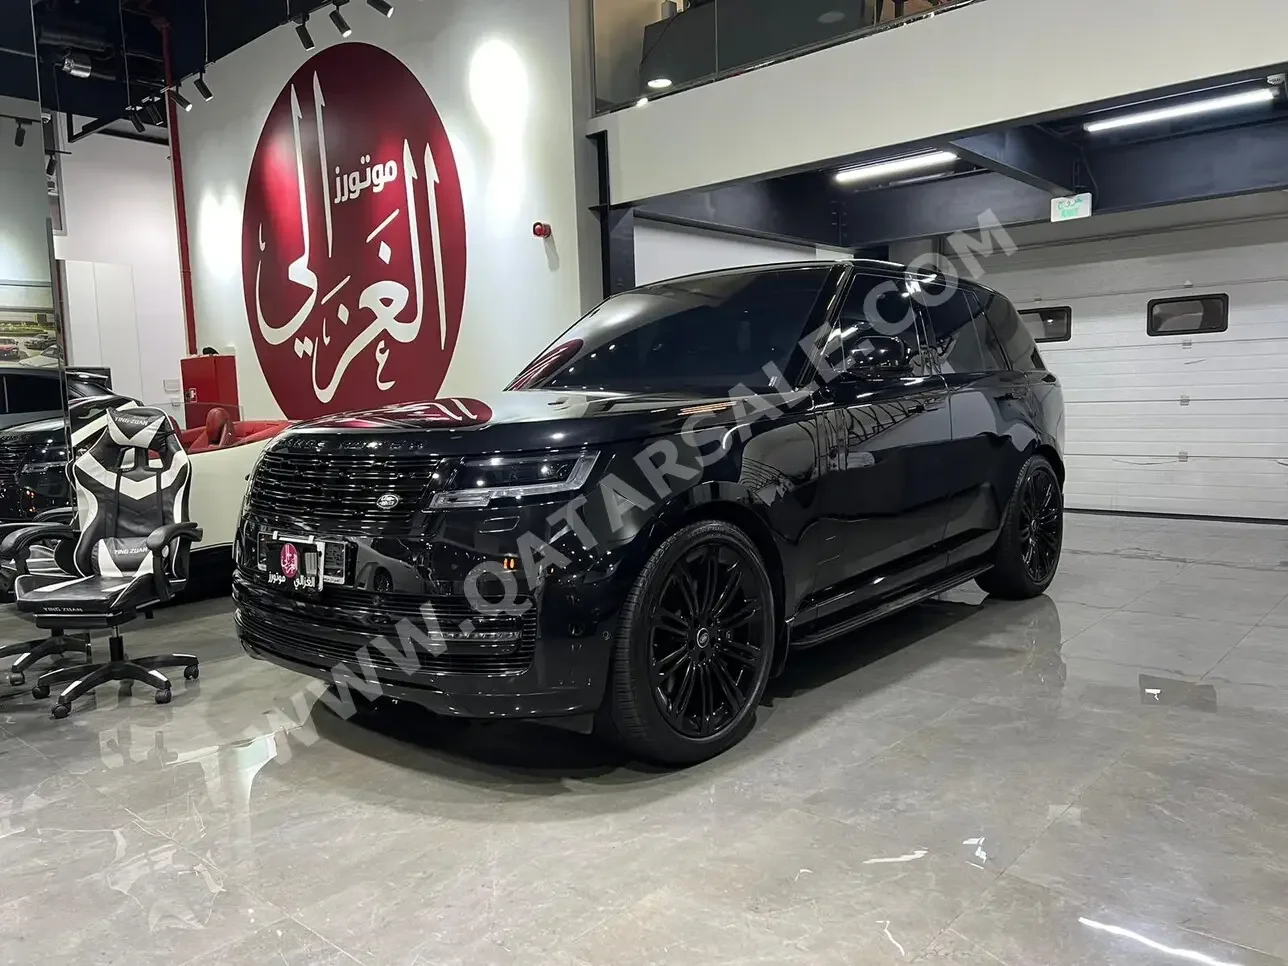  Land Rover  Range Rover  Vogue  2023  Automatic  28,000 Km  8 Cylinder  Four Wheel Drive (4WD)  SUV  Black  With Warranty